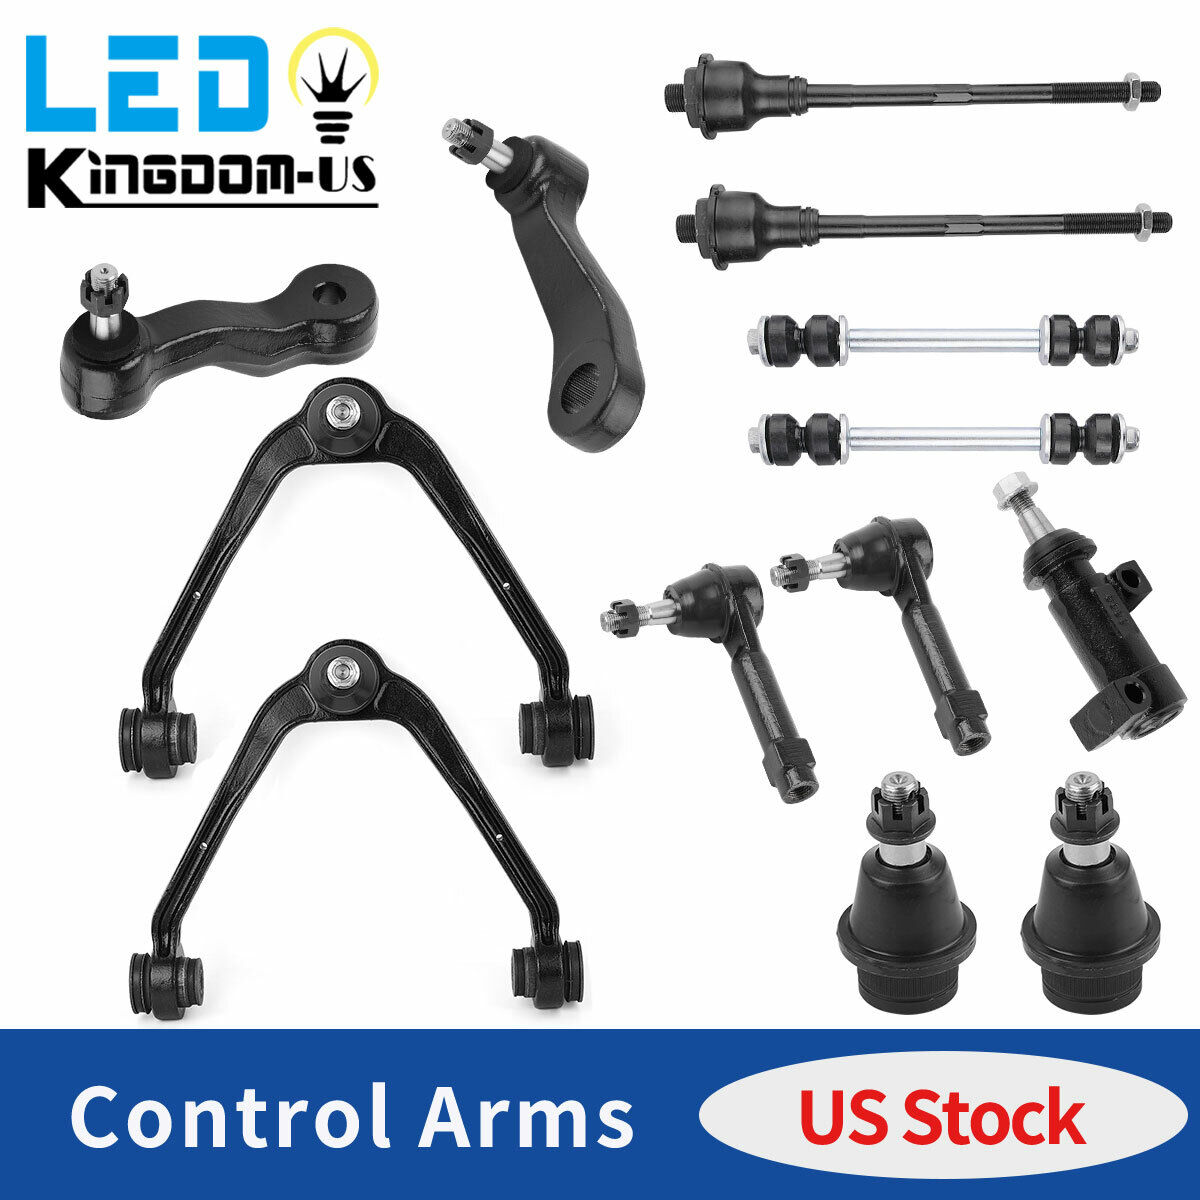 13x Front Upper Control Arms Suspension Kit for Chevy Silverado GMC Sierra 1500